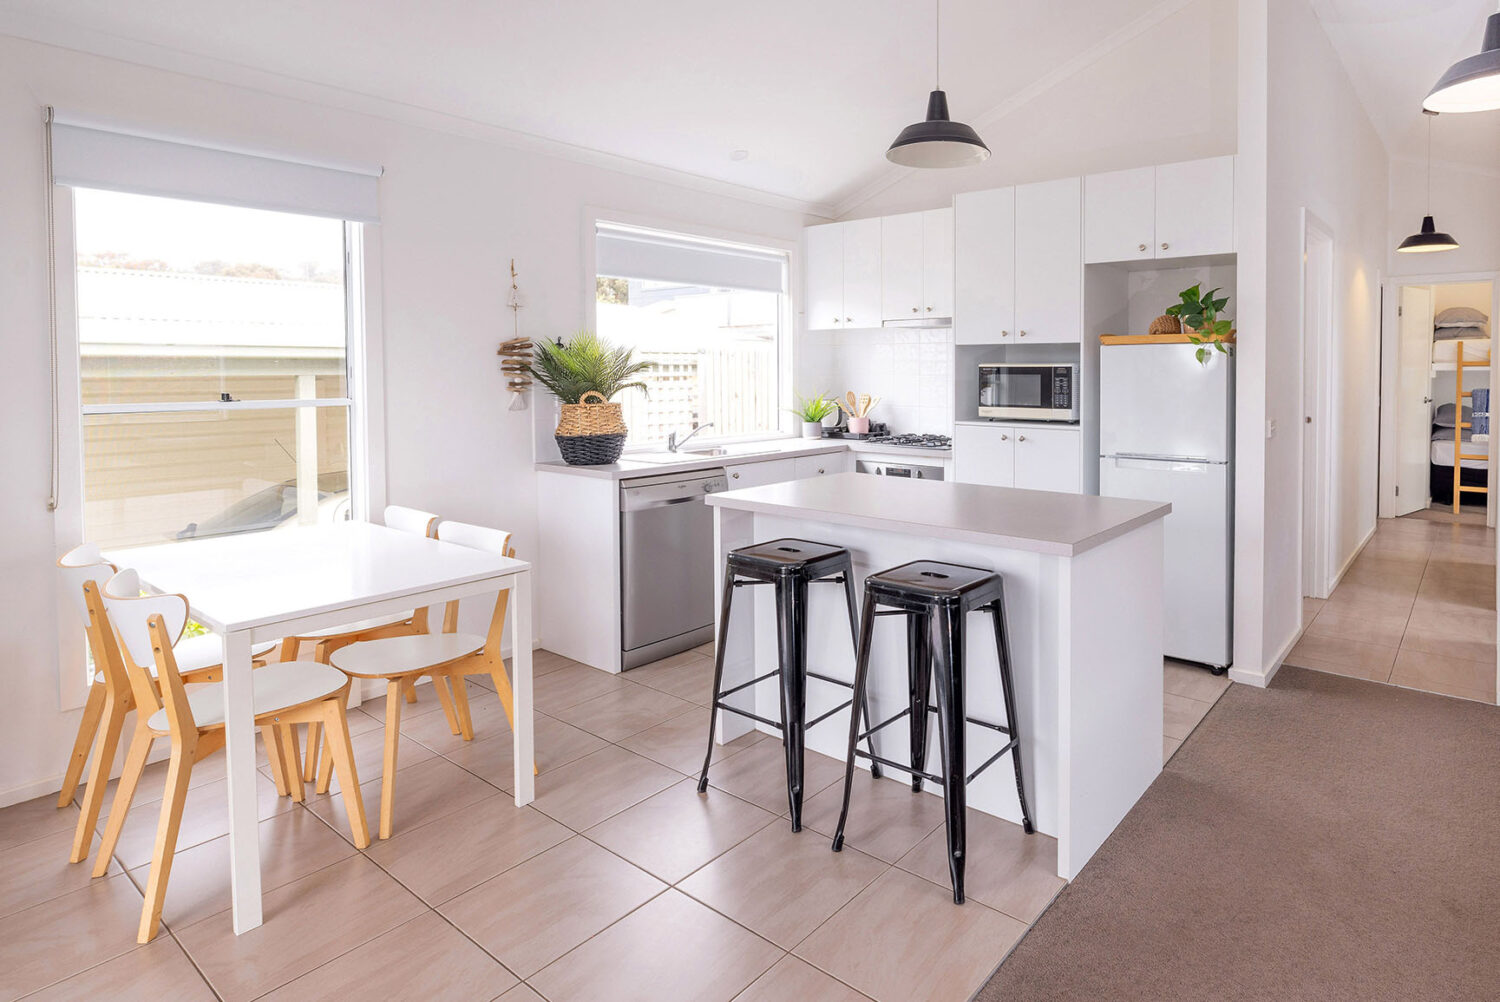 BIG4 Anglesea - Kitchen and Dining Area in the 3 Bedroom Cabin